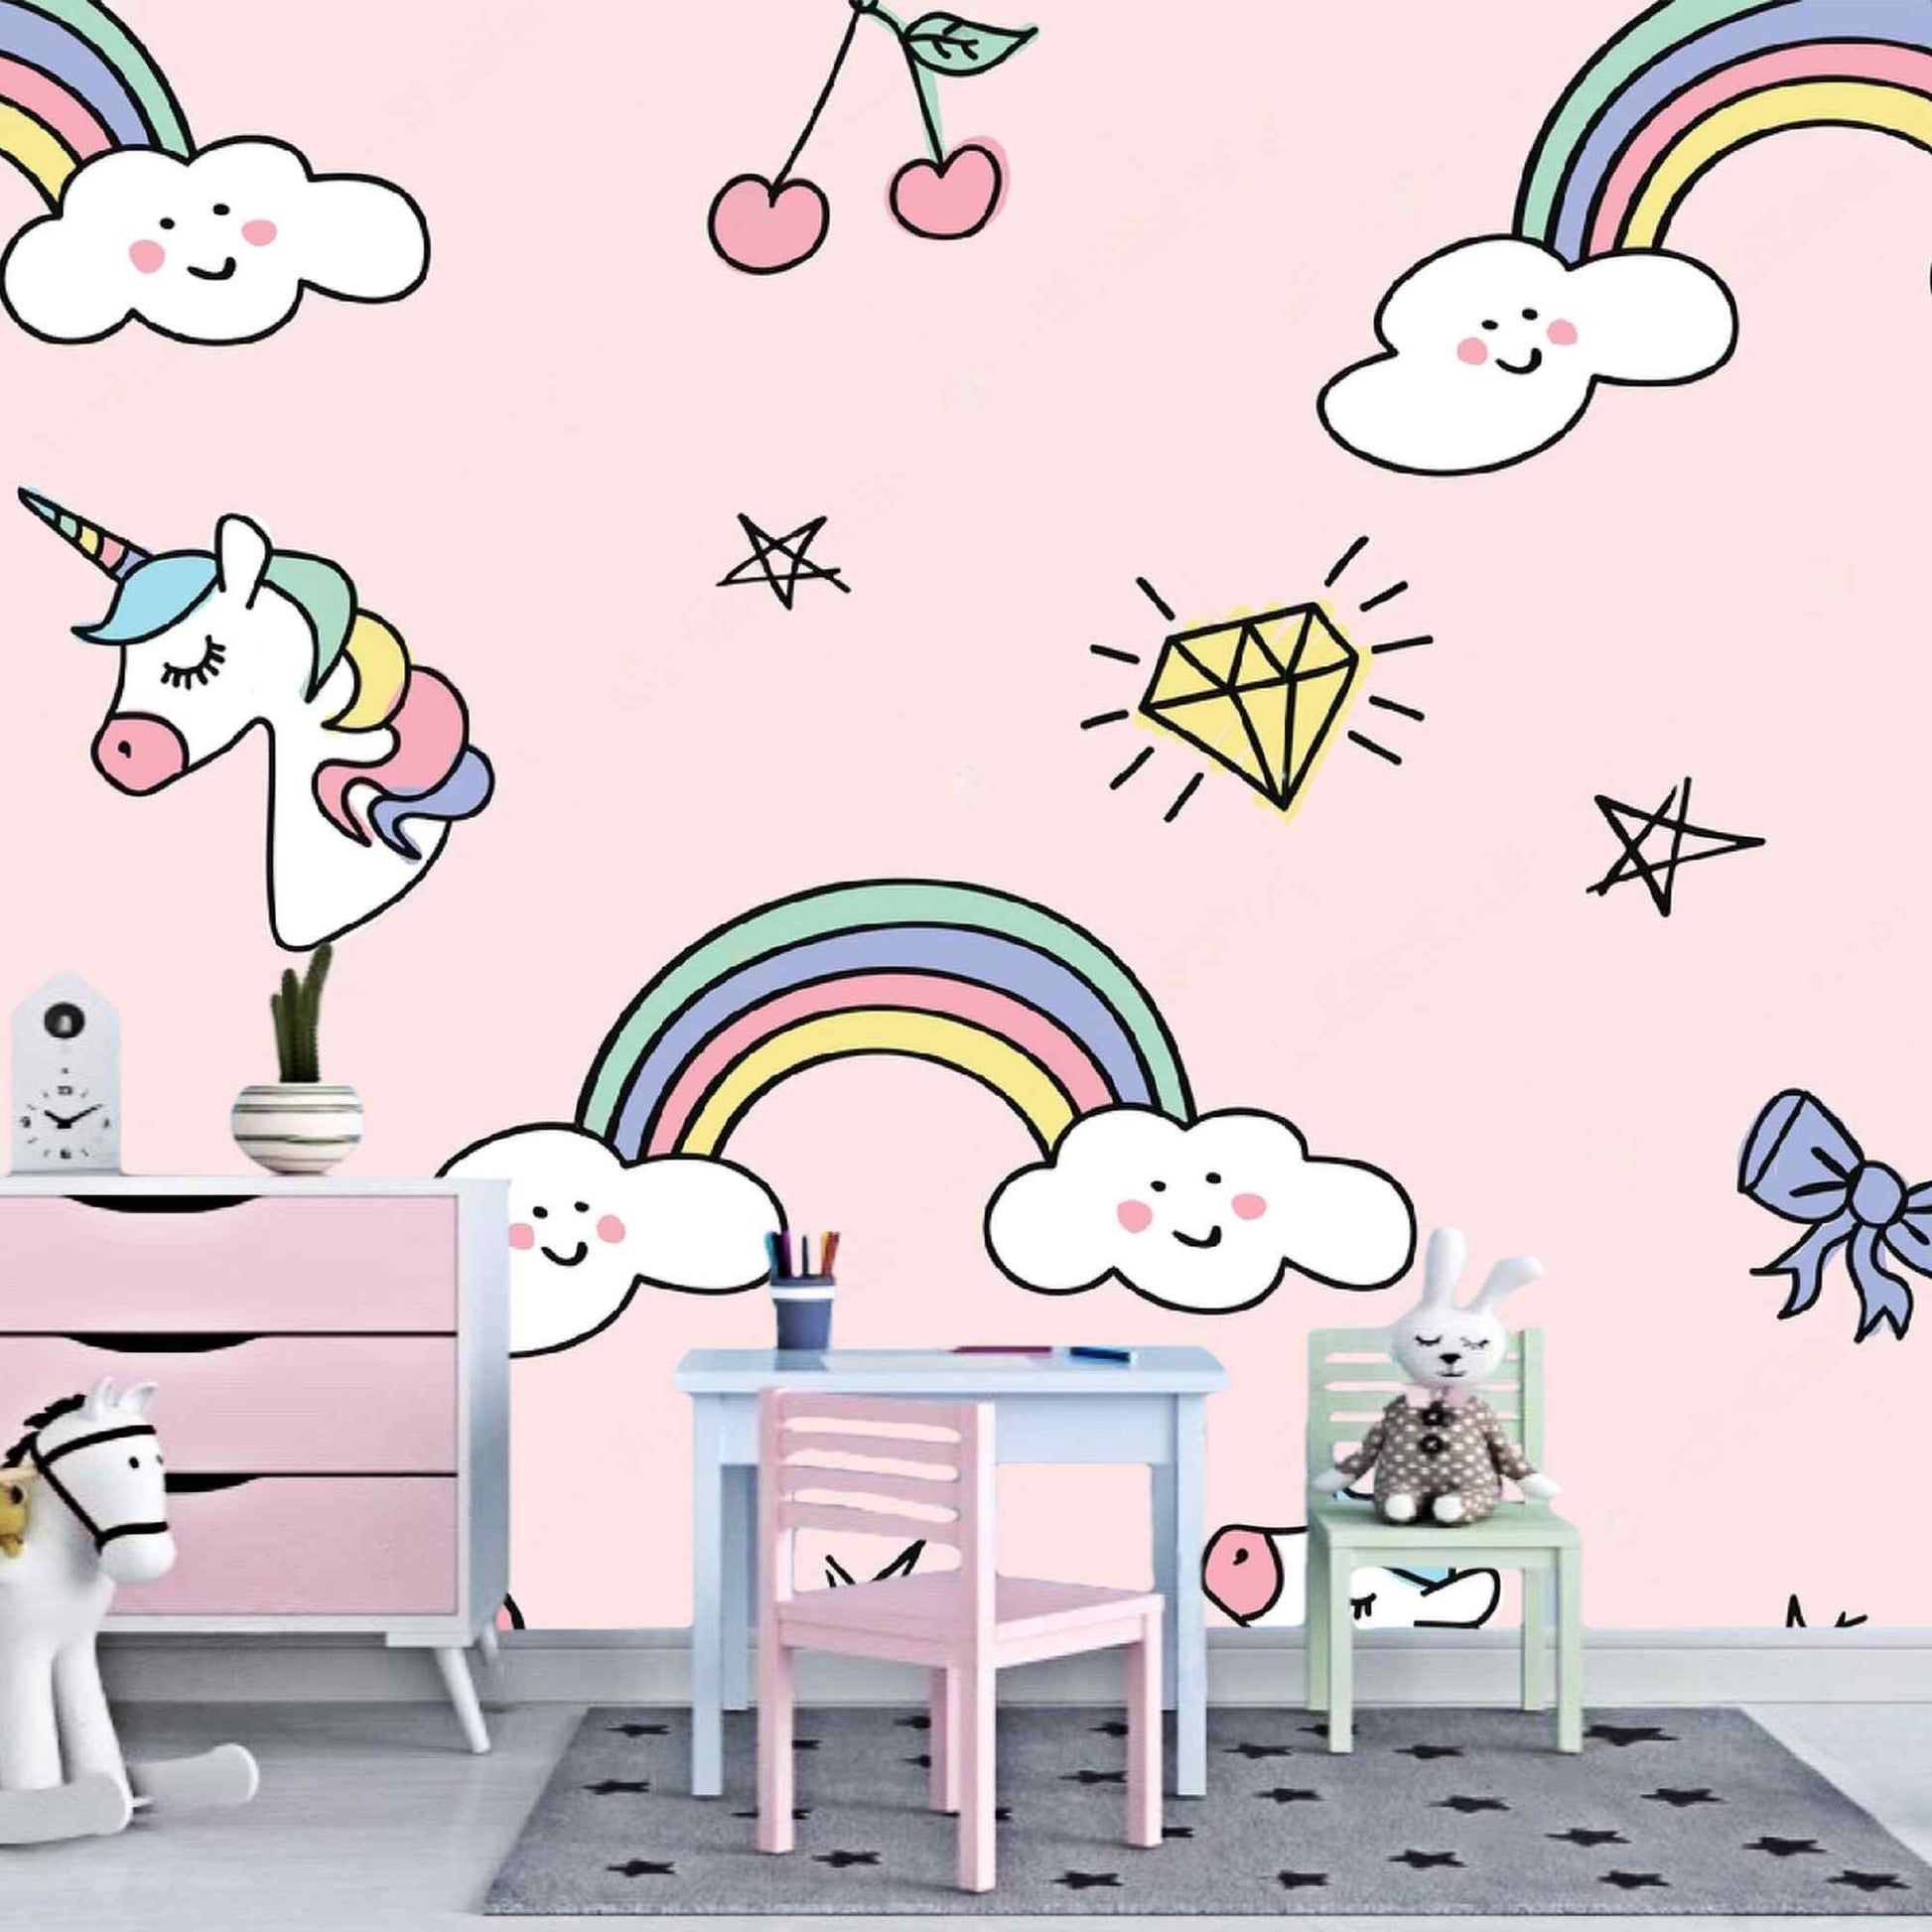 Whimsical kids wallpaper in a newborn baby girl's nursery, creating a playful and enchanting atmosphere.